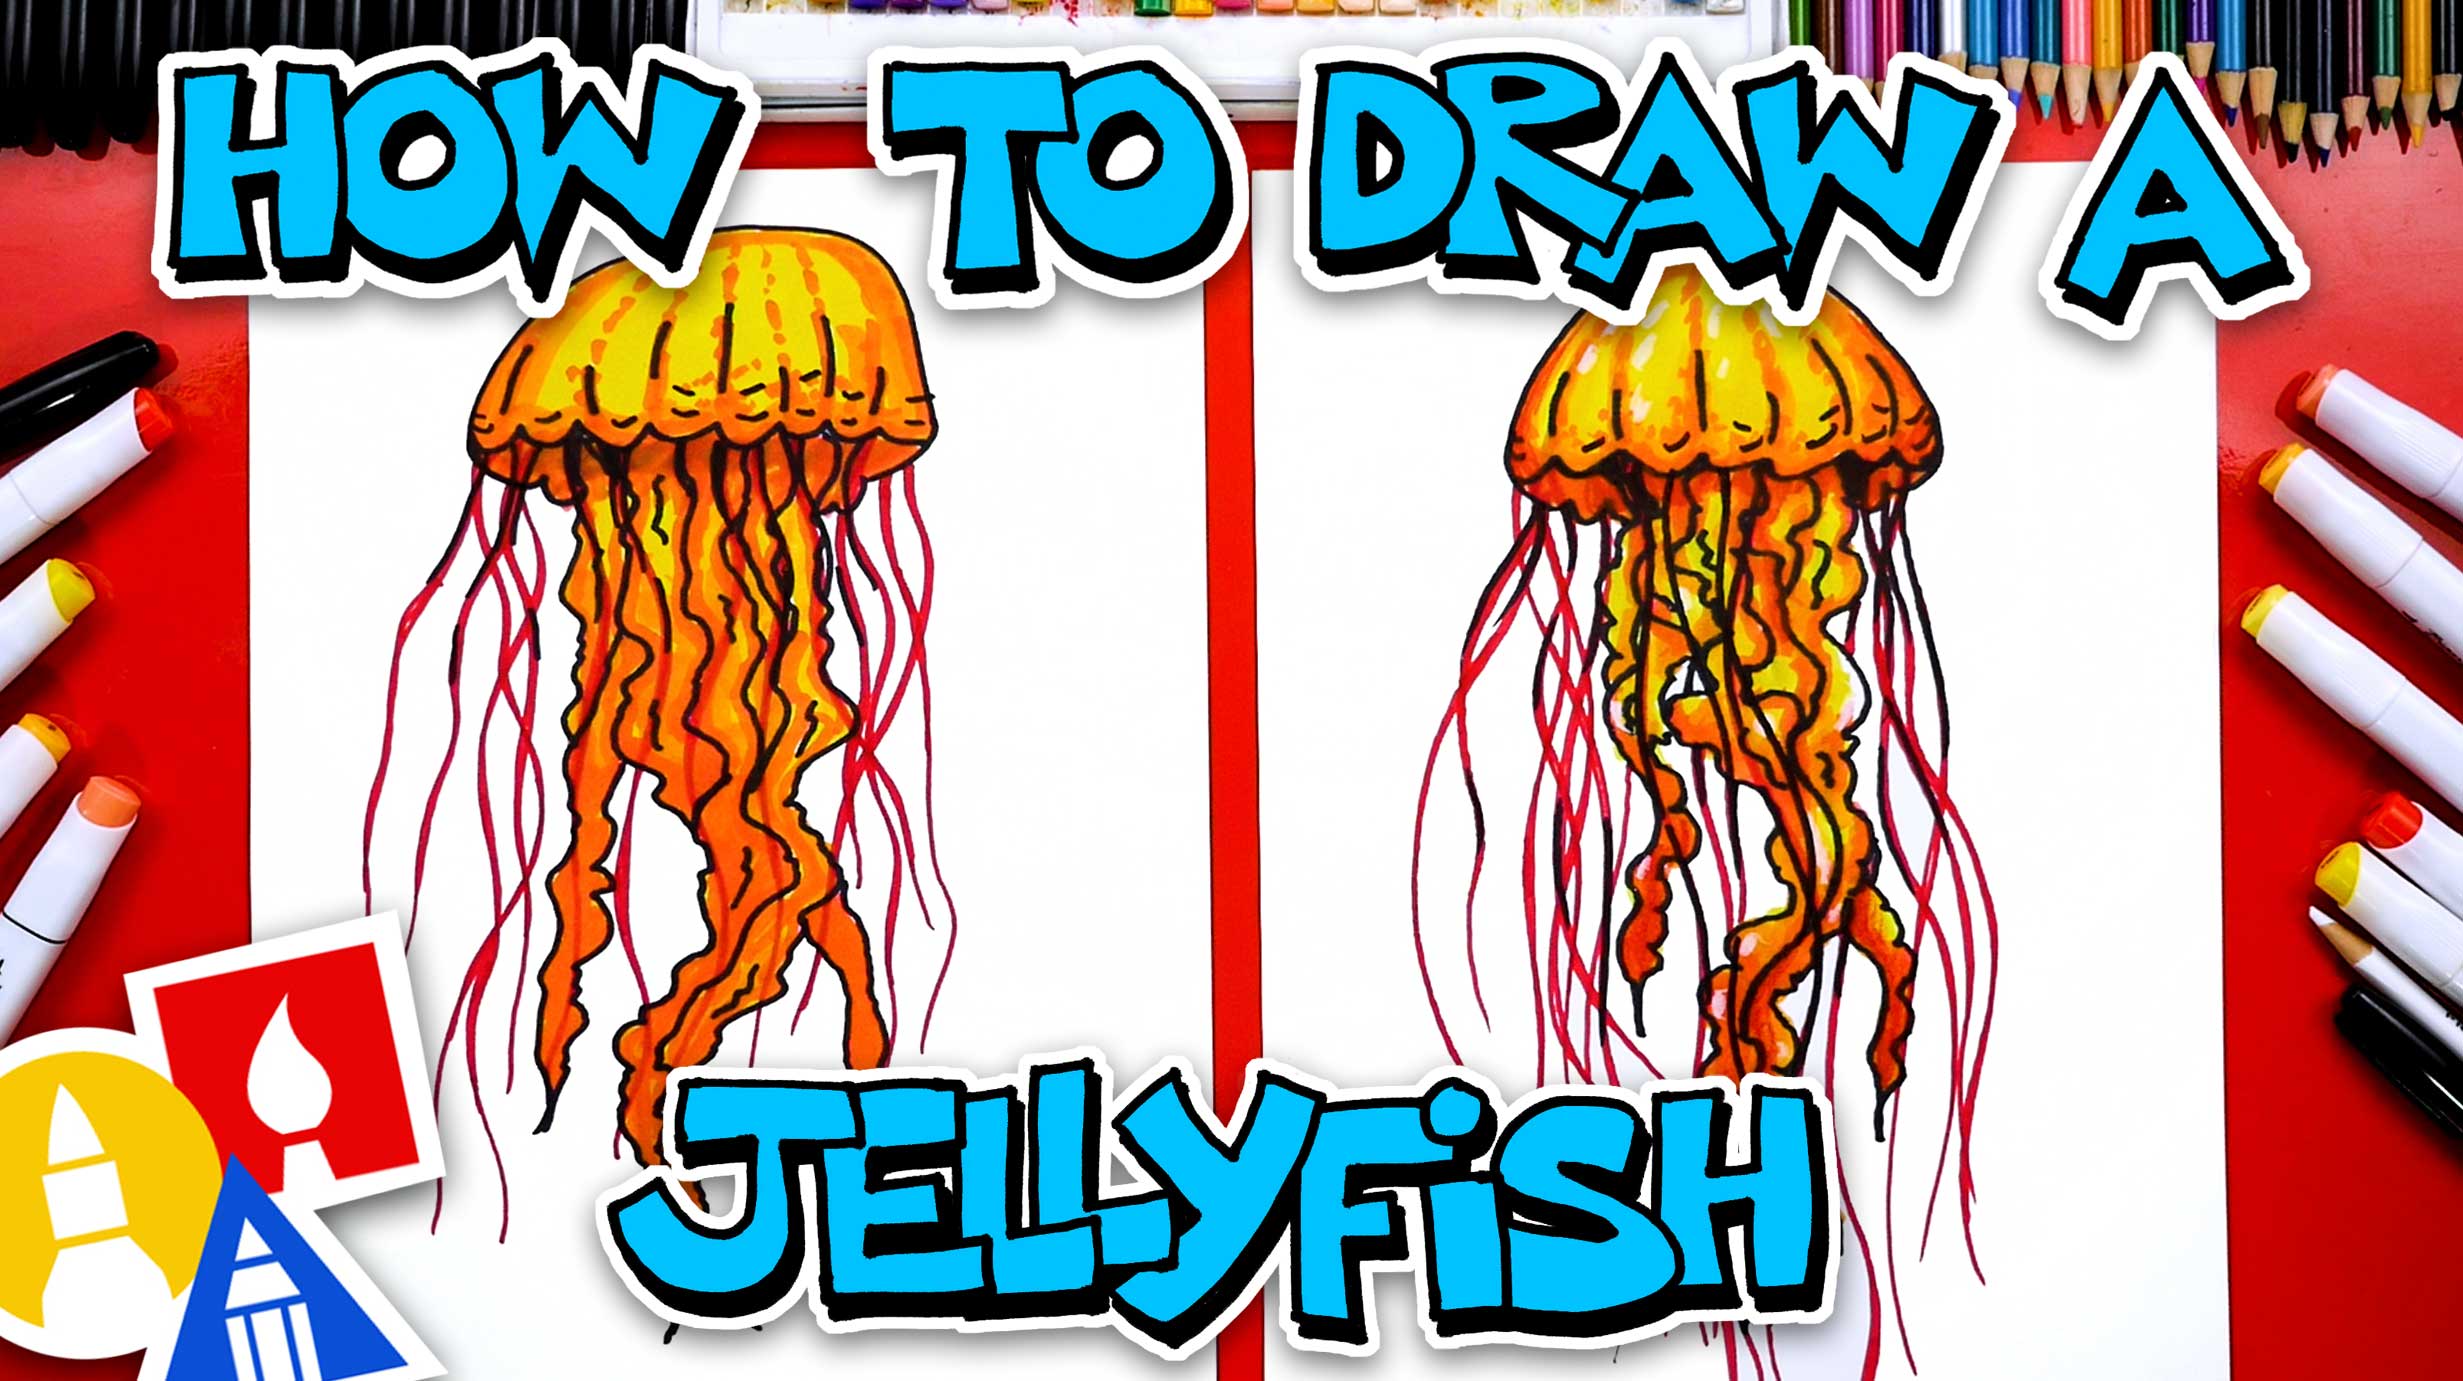 how to draw a jellyfish step by step for kids